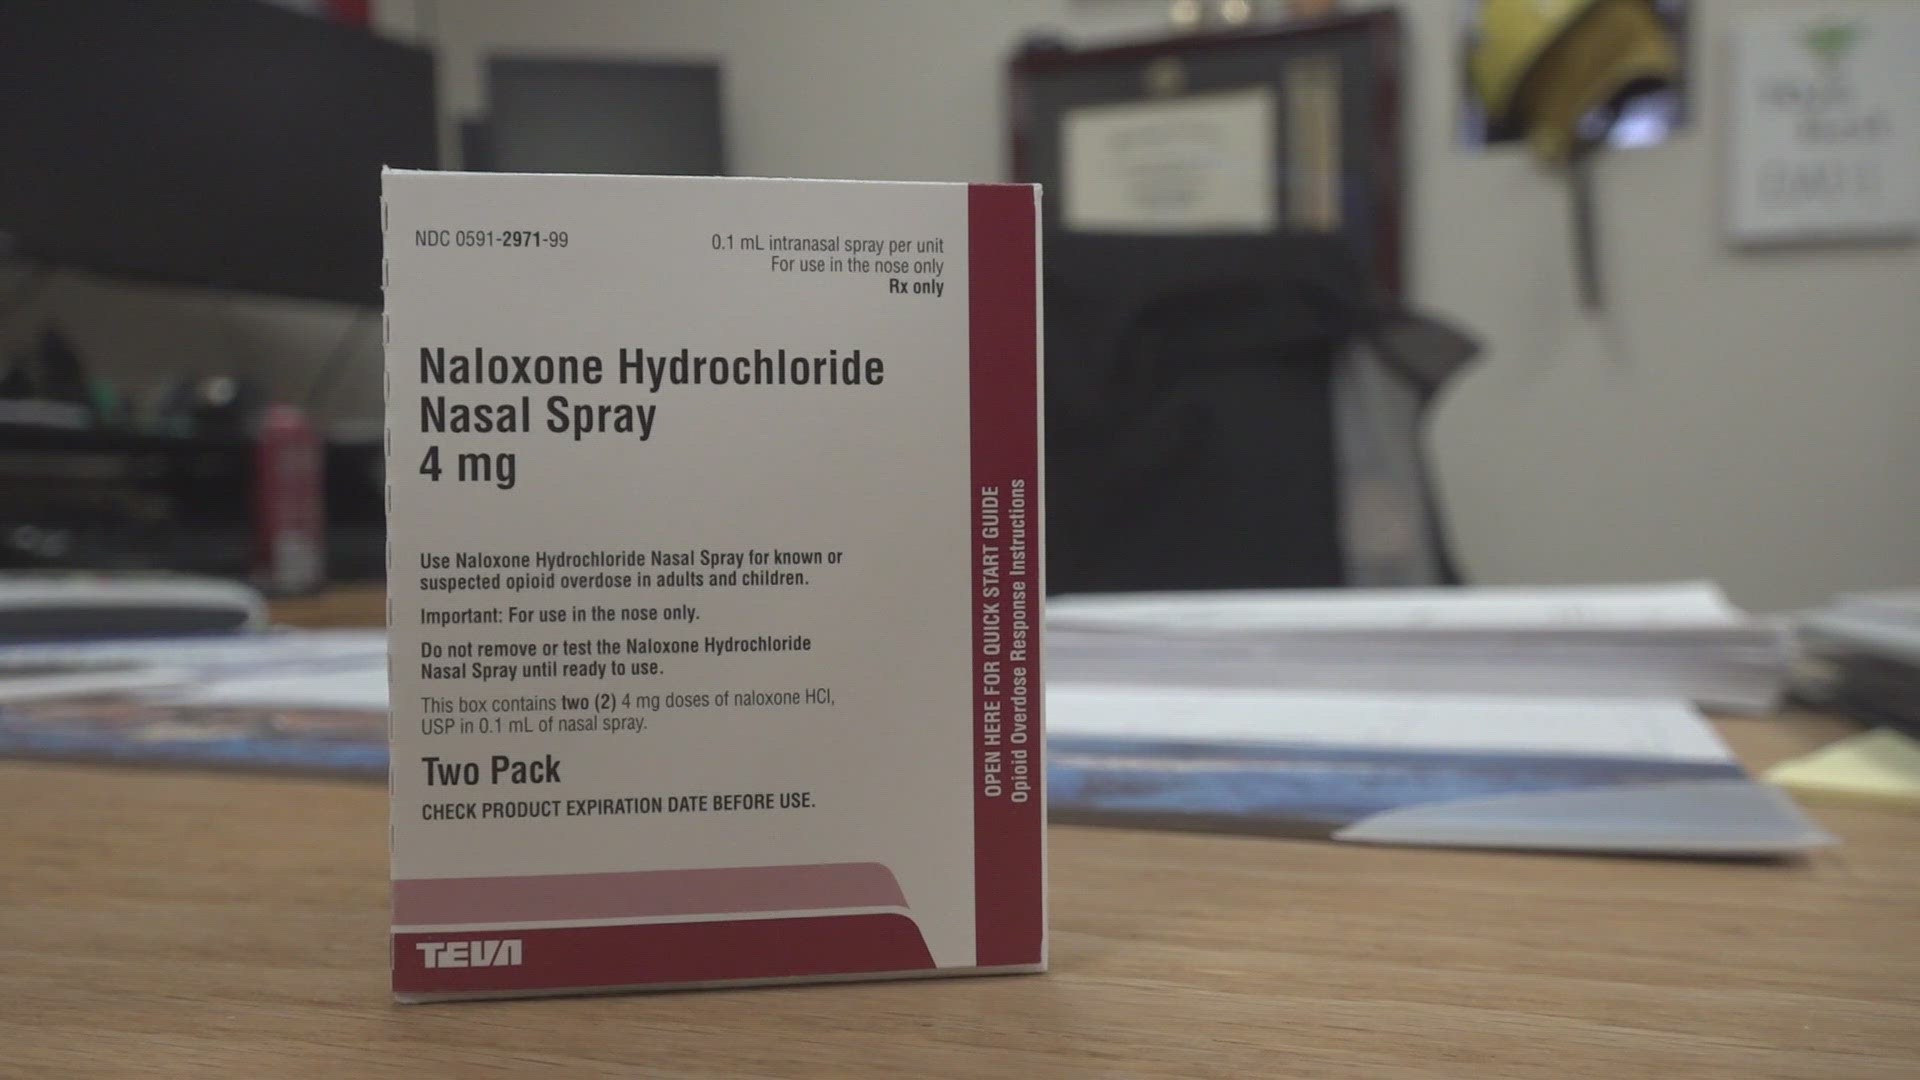 The State of Texas recently supplied more Narcan to local law enforcement agencies around the state.